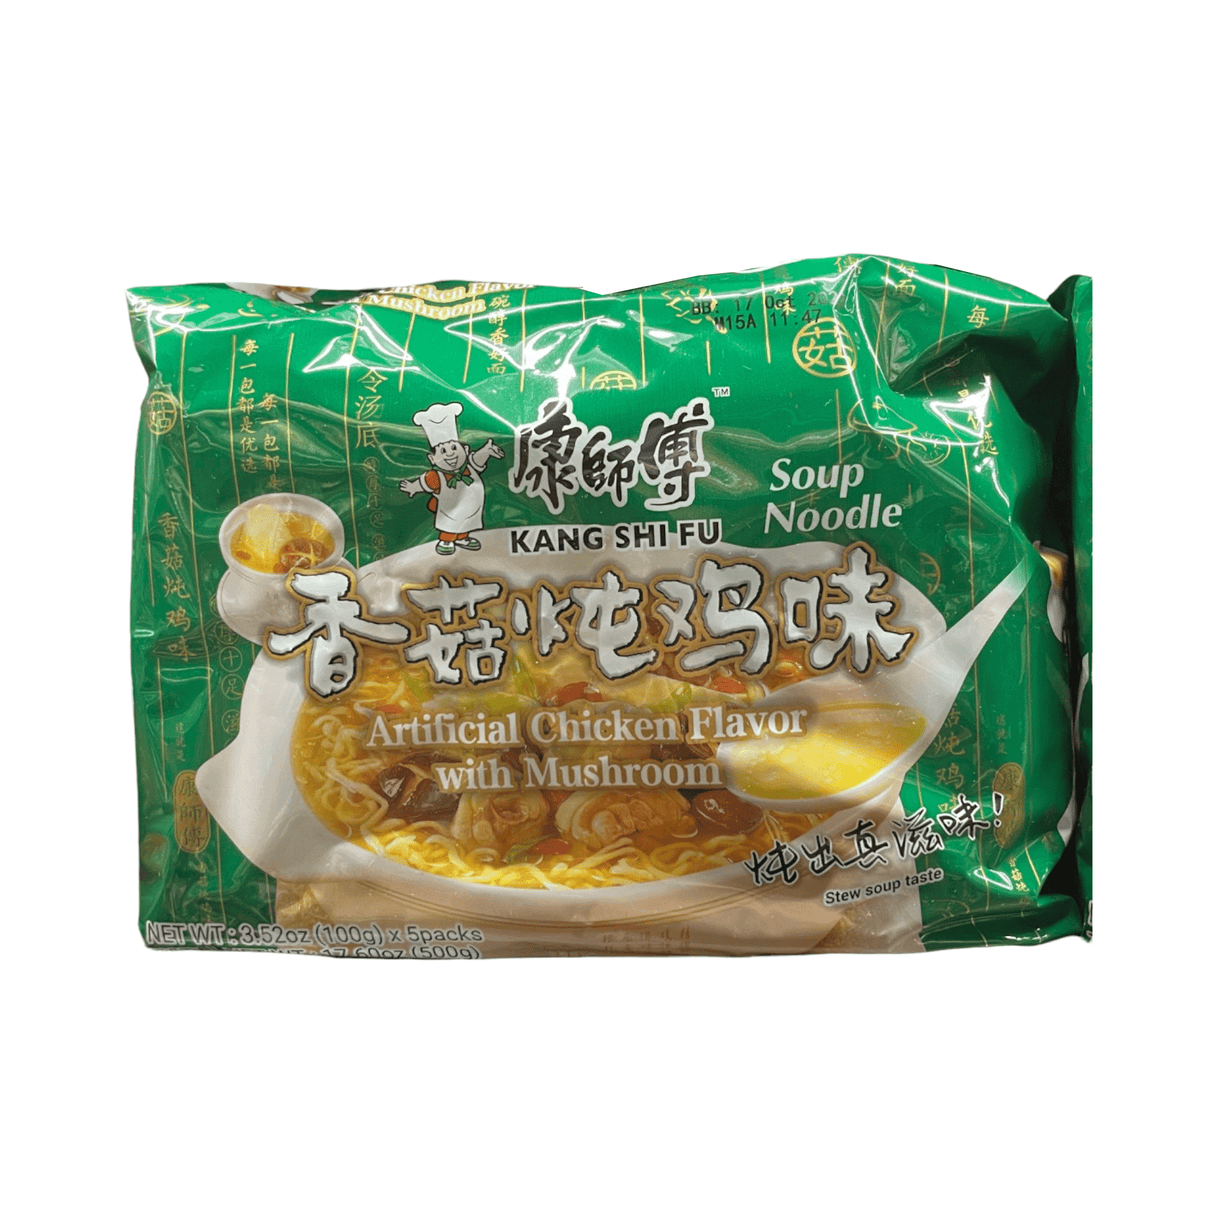 Kang Shi Fu Soup Noodle Artificial Chicken Flavor with Mushroom